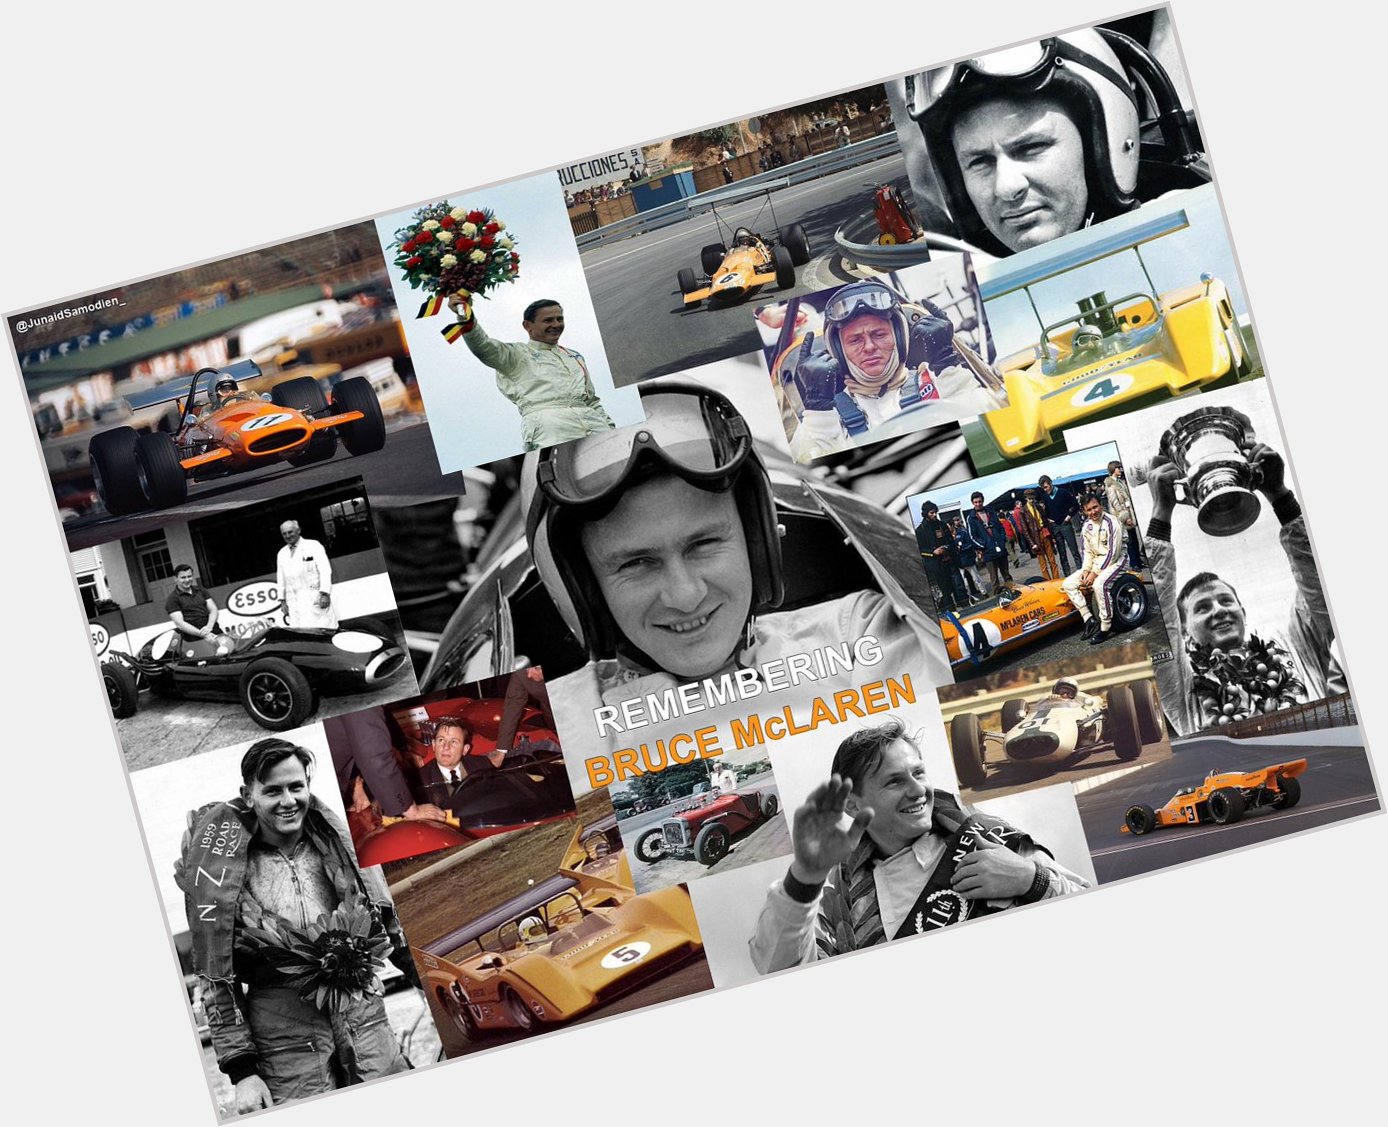 Happy Birthday to Bruce McLaren who would have been 78 today! 